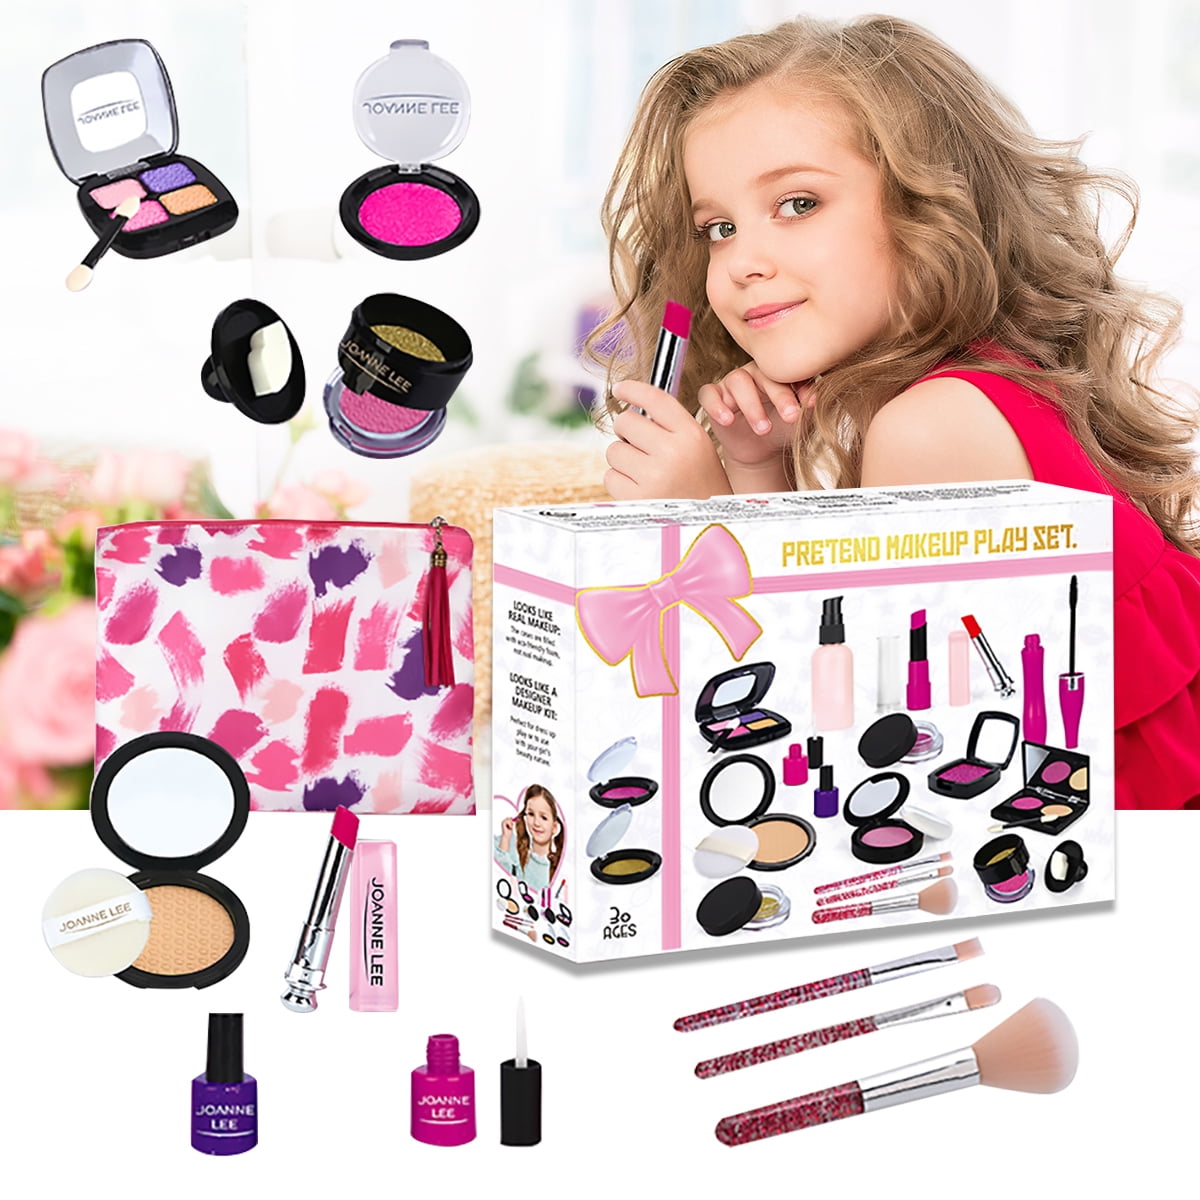 Kids Makeup Toys Girls Games Baby Cosmetics Pretend Play Set Hairdressing  Make Up Beauty Toy For Girl Developing Game Toy - 18 pcs